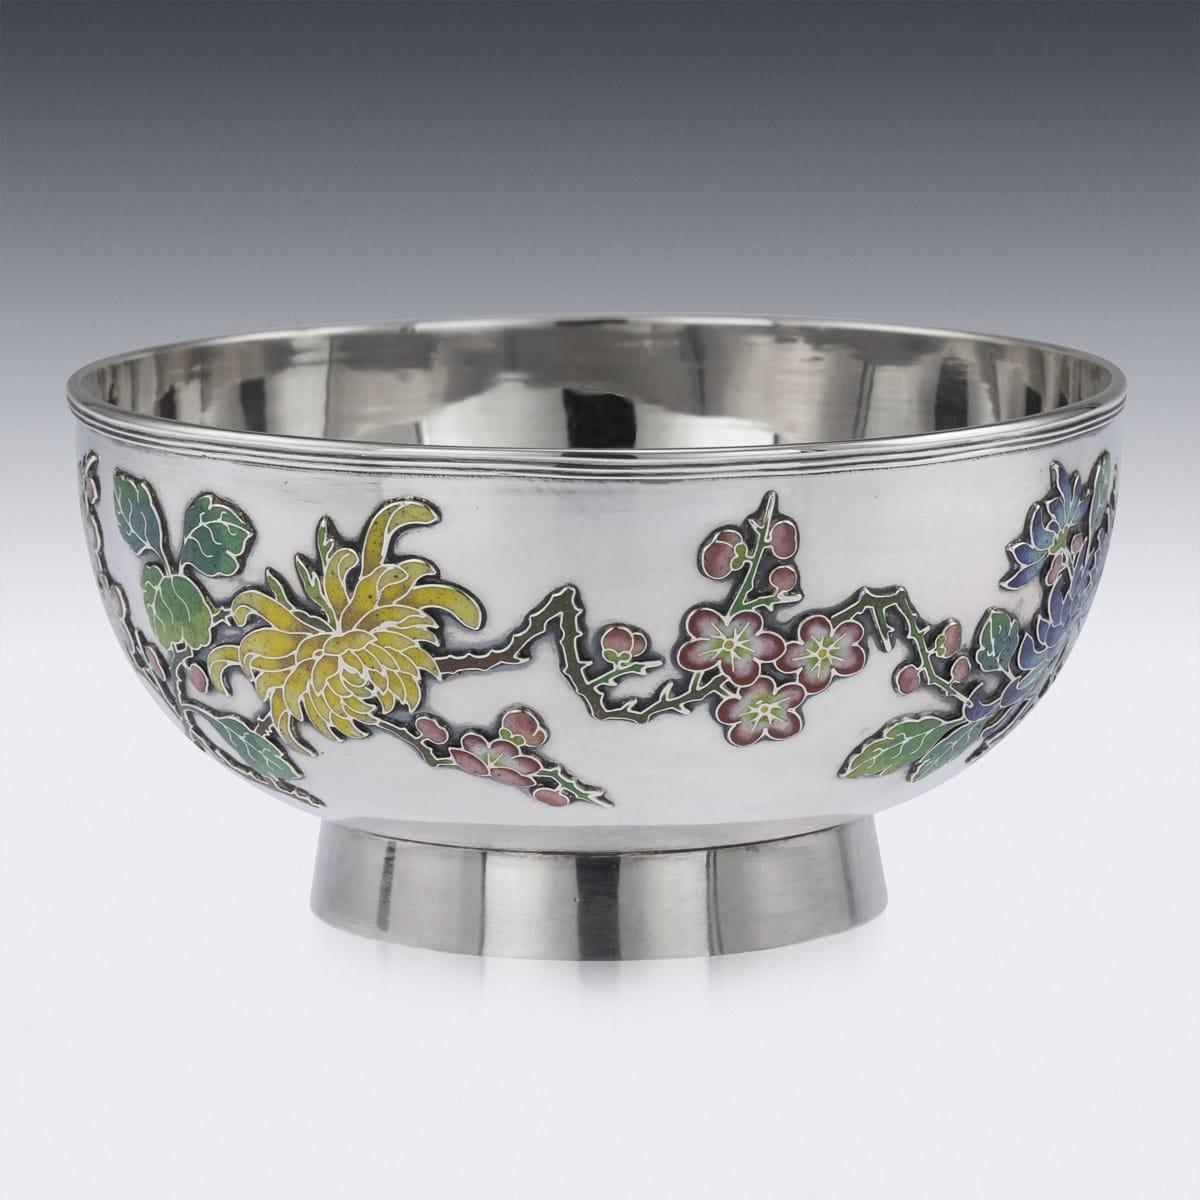 19th Century Rare Chinese Export Solid Silver & Enamel Bowl, Wo Kwong circa 1890 For Sale 1